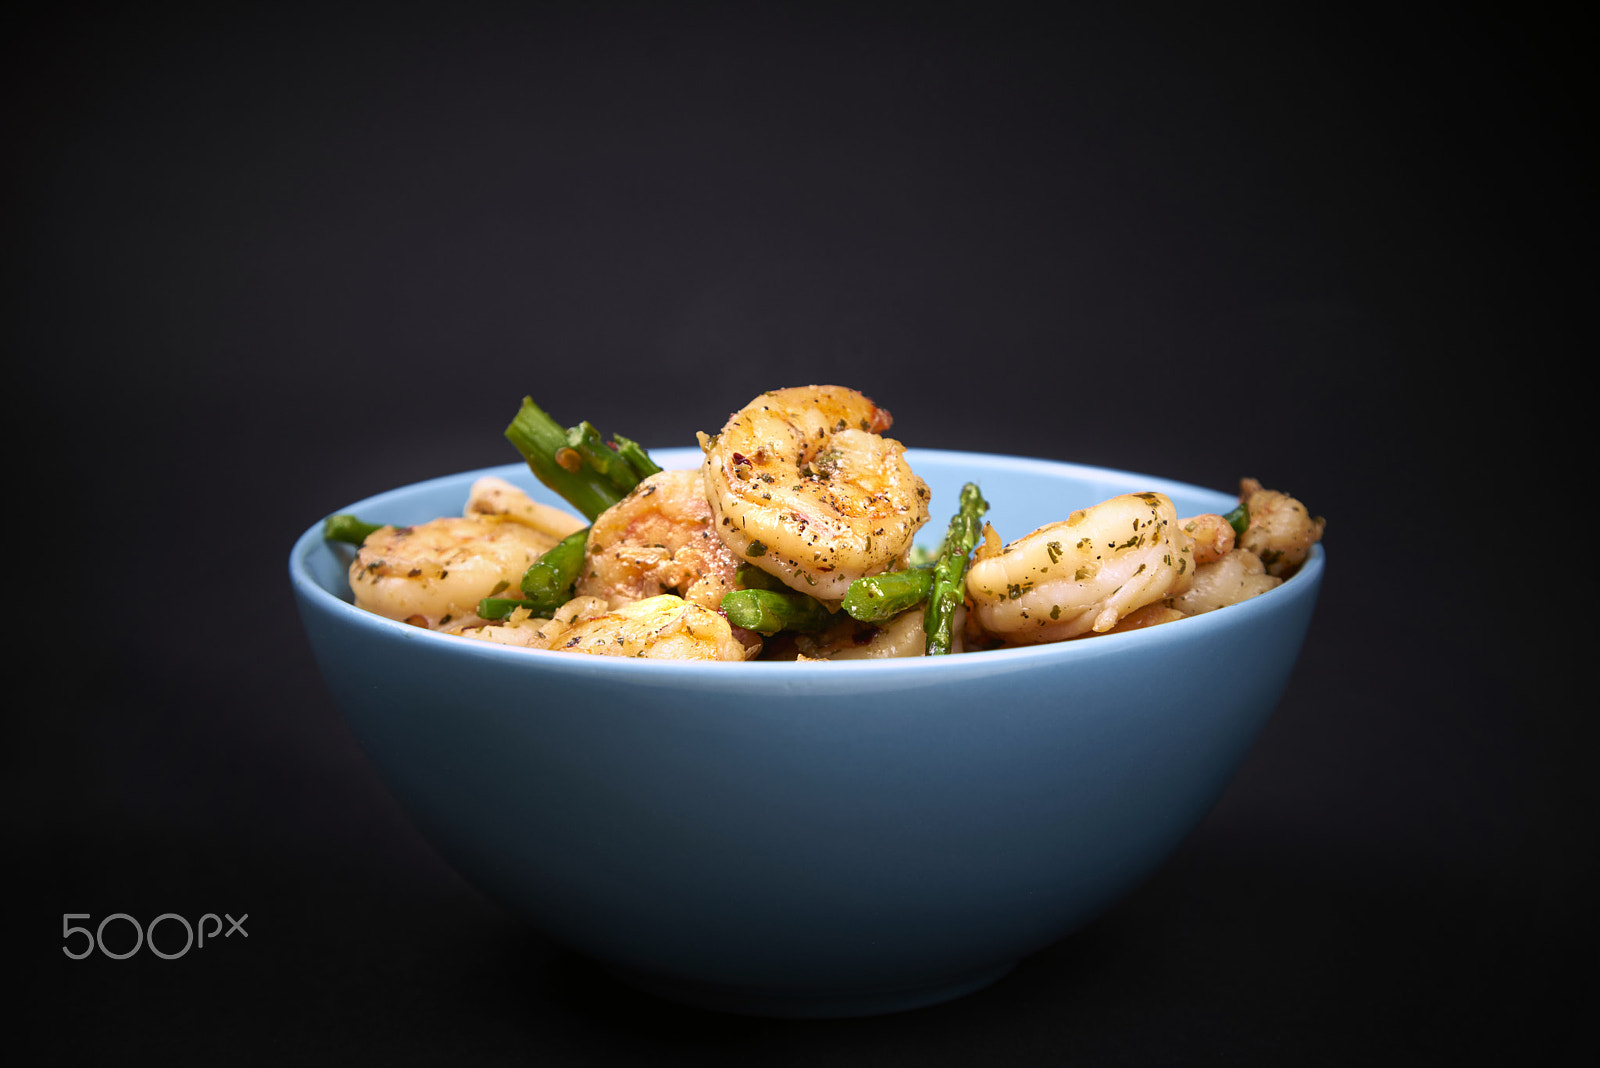 Sony a7R sample photo. Fried shrimps and asparagus in a bowl photography